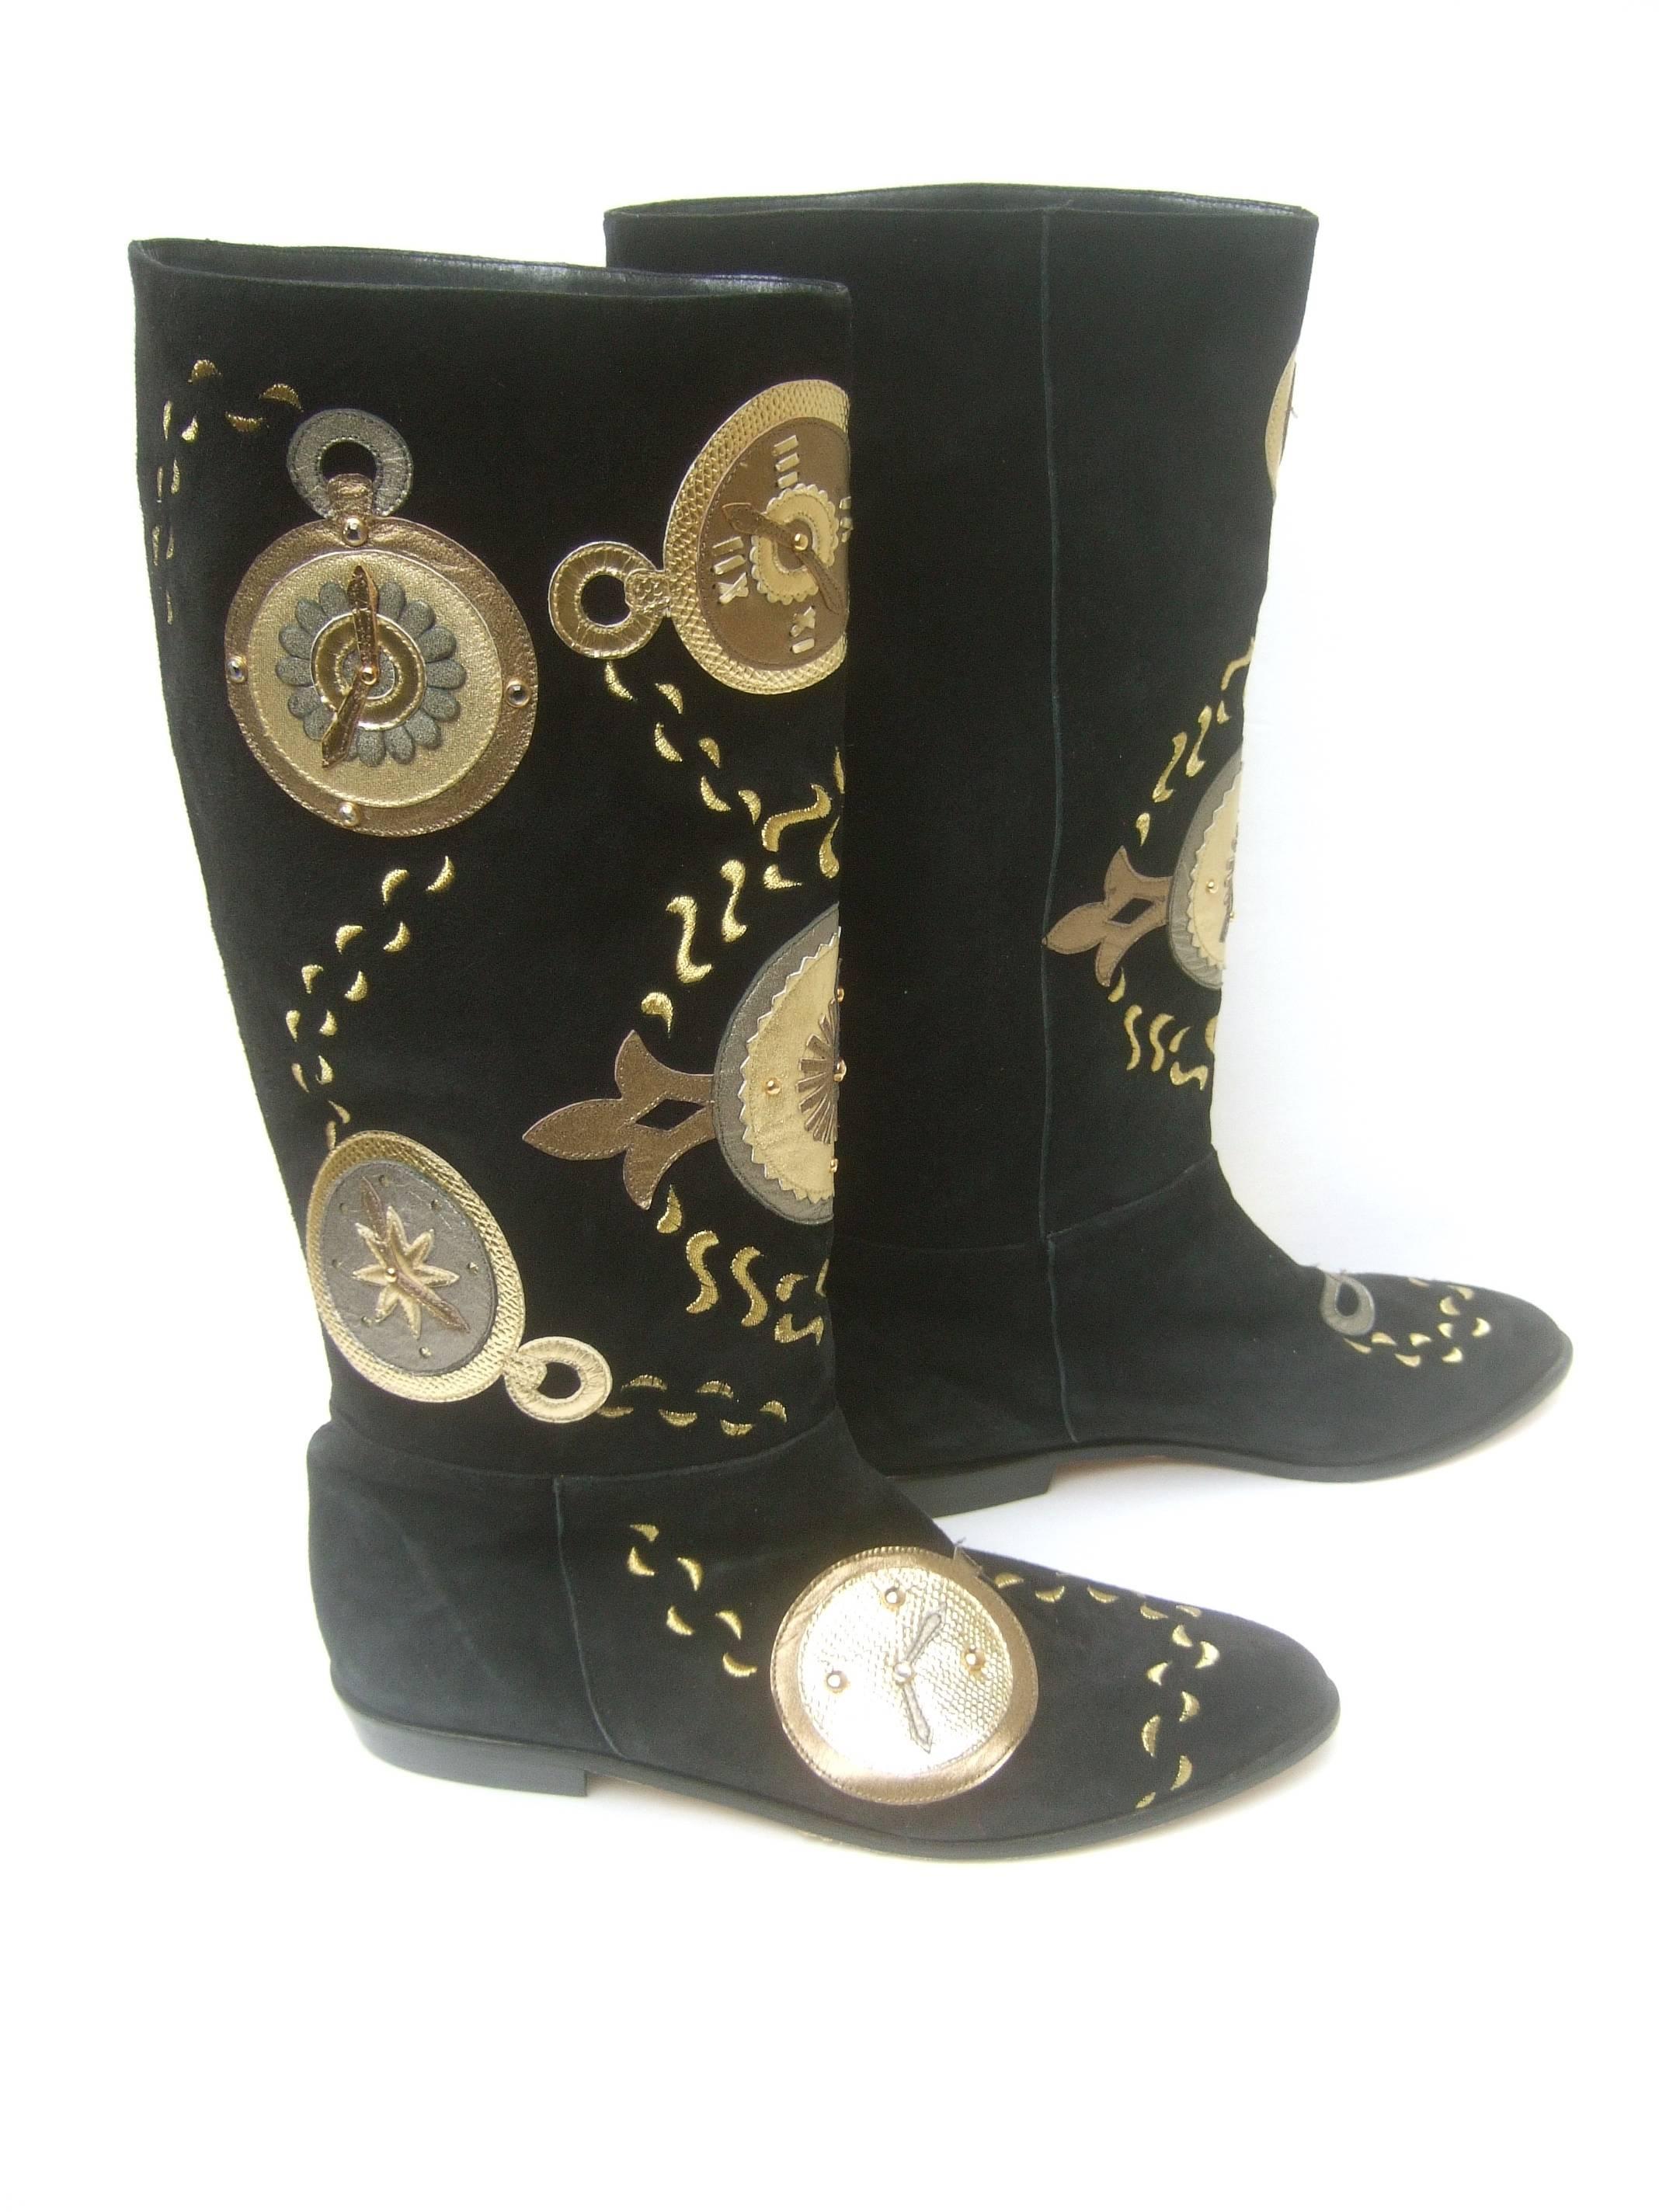 Unique Black Suede Metallic Clock Theme Boots by Zalo  In Excellent Condition For Sale In University City, MO